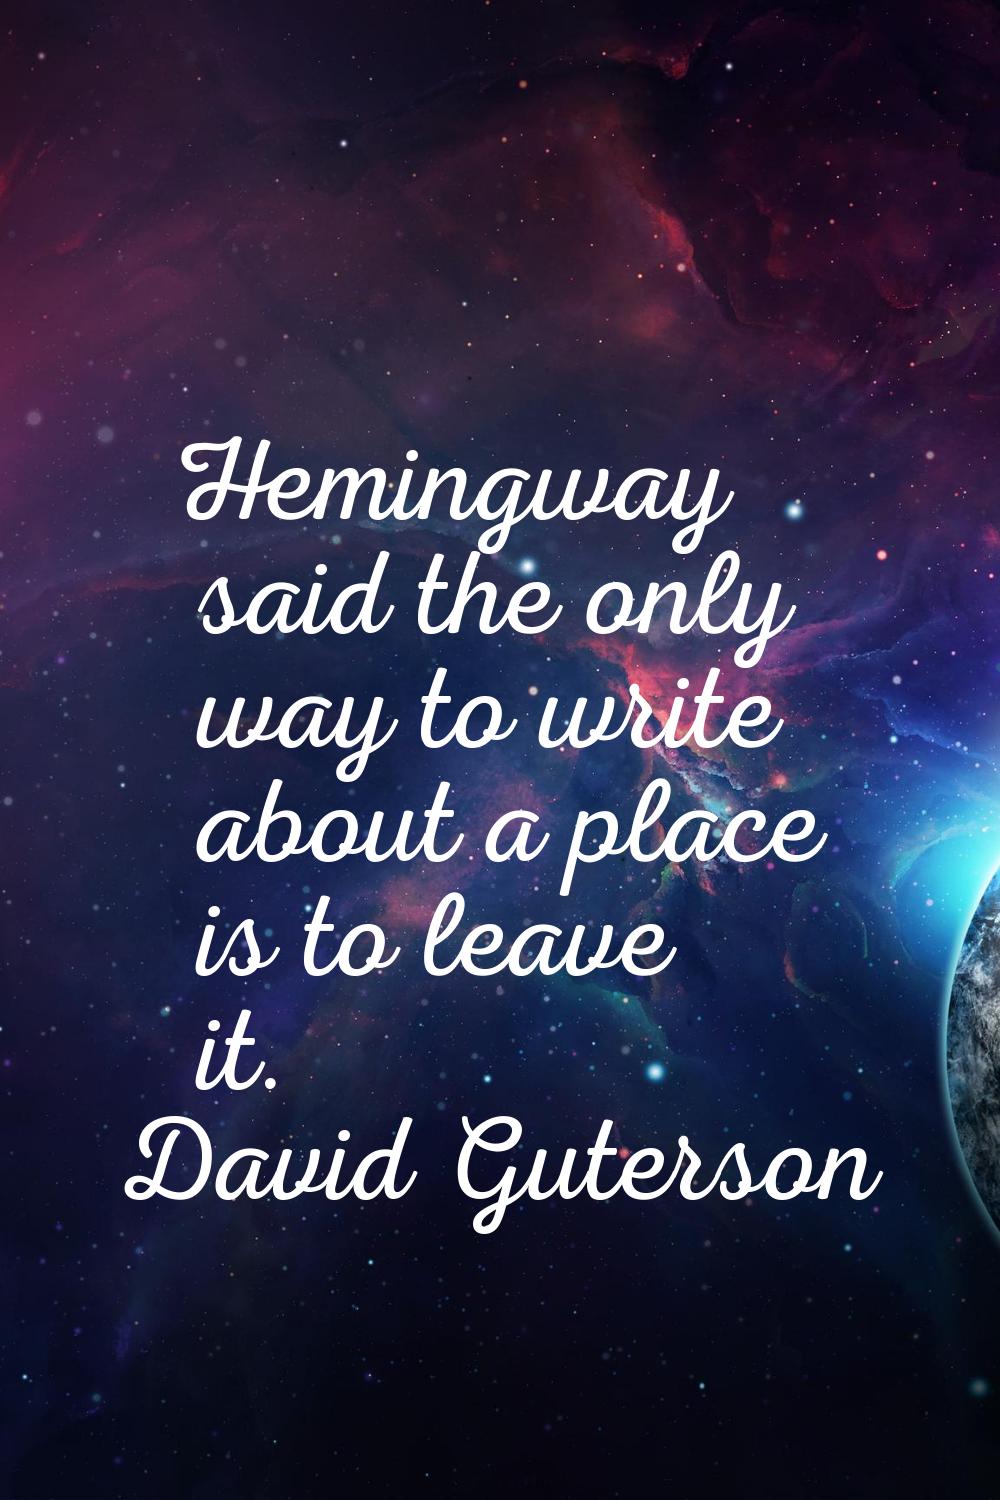 Hemingway said the only way to write about a place is to leave it.